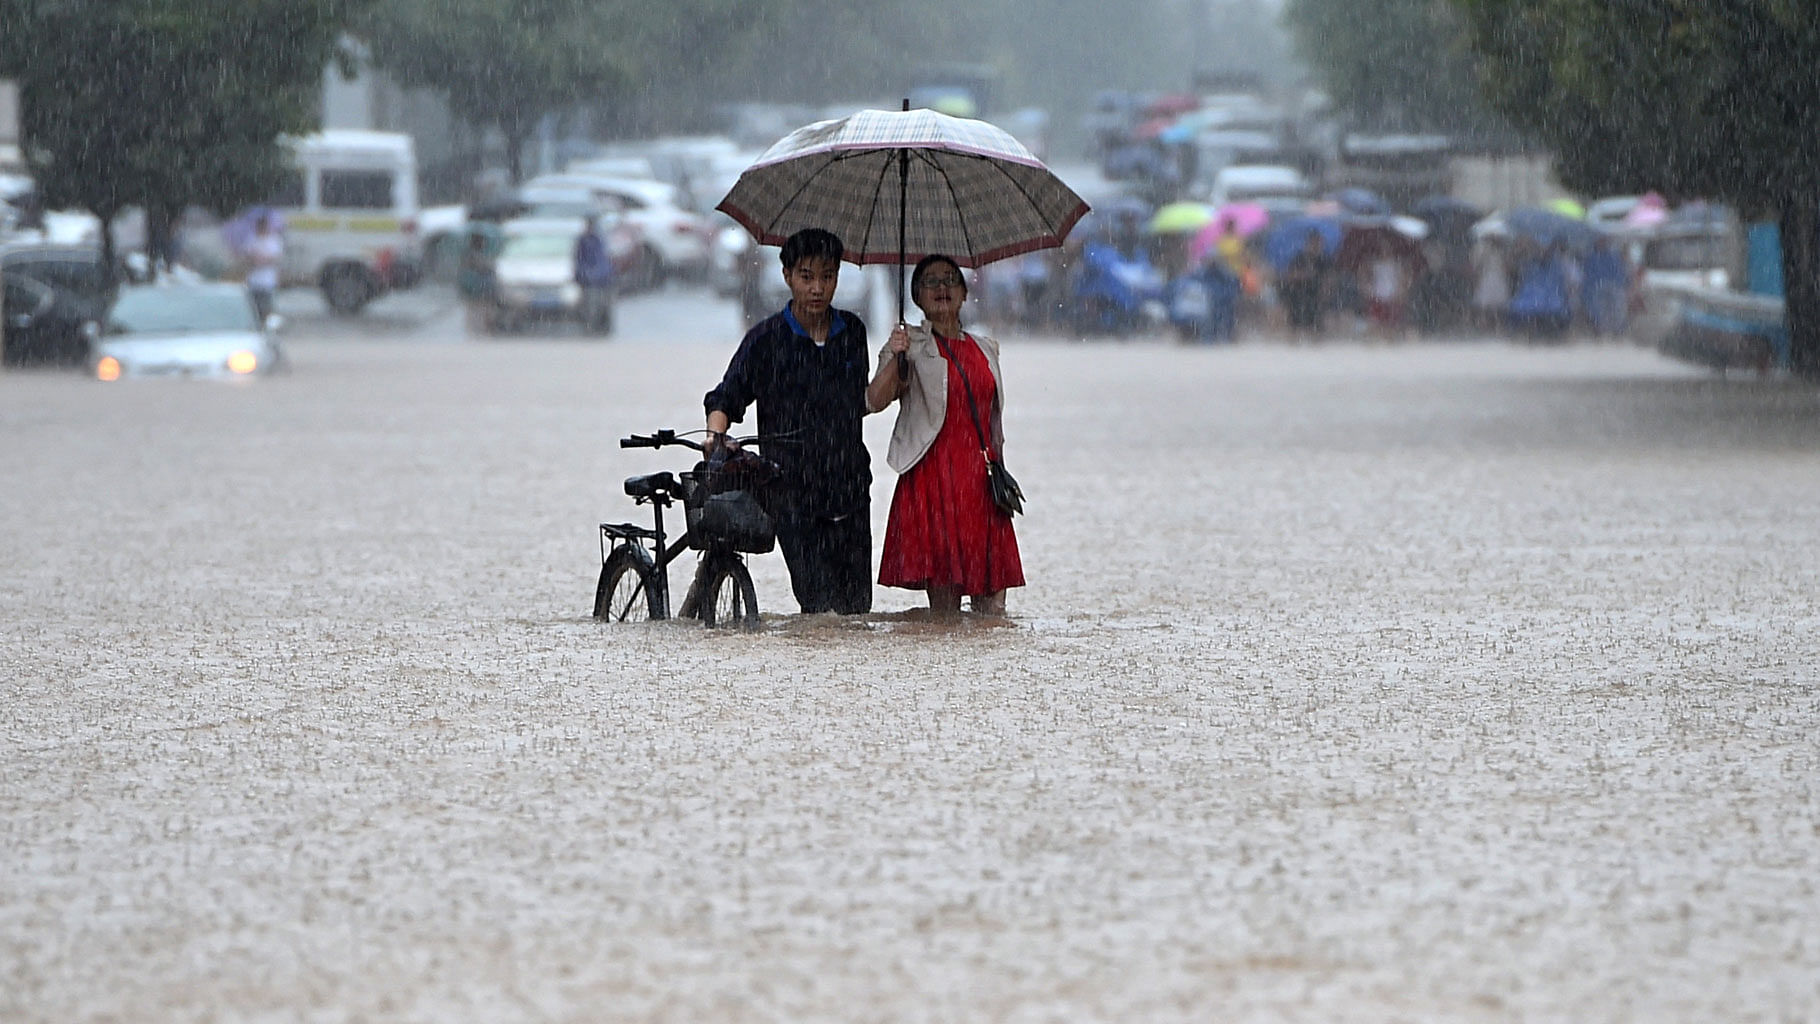 A couple holding an umbrella wade through a flooded road in Wuhan in central China’s Hubei province. (Photo: AP)